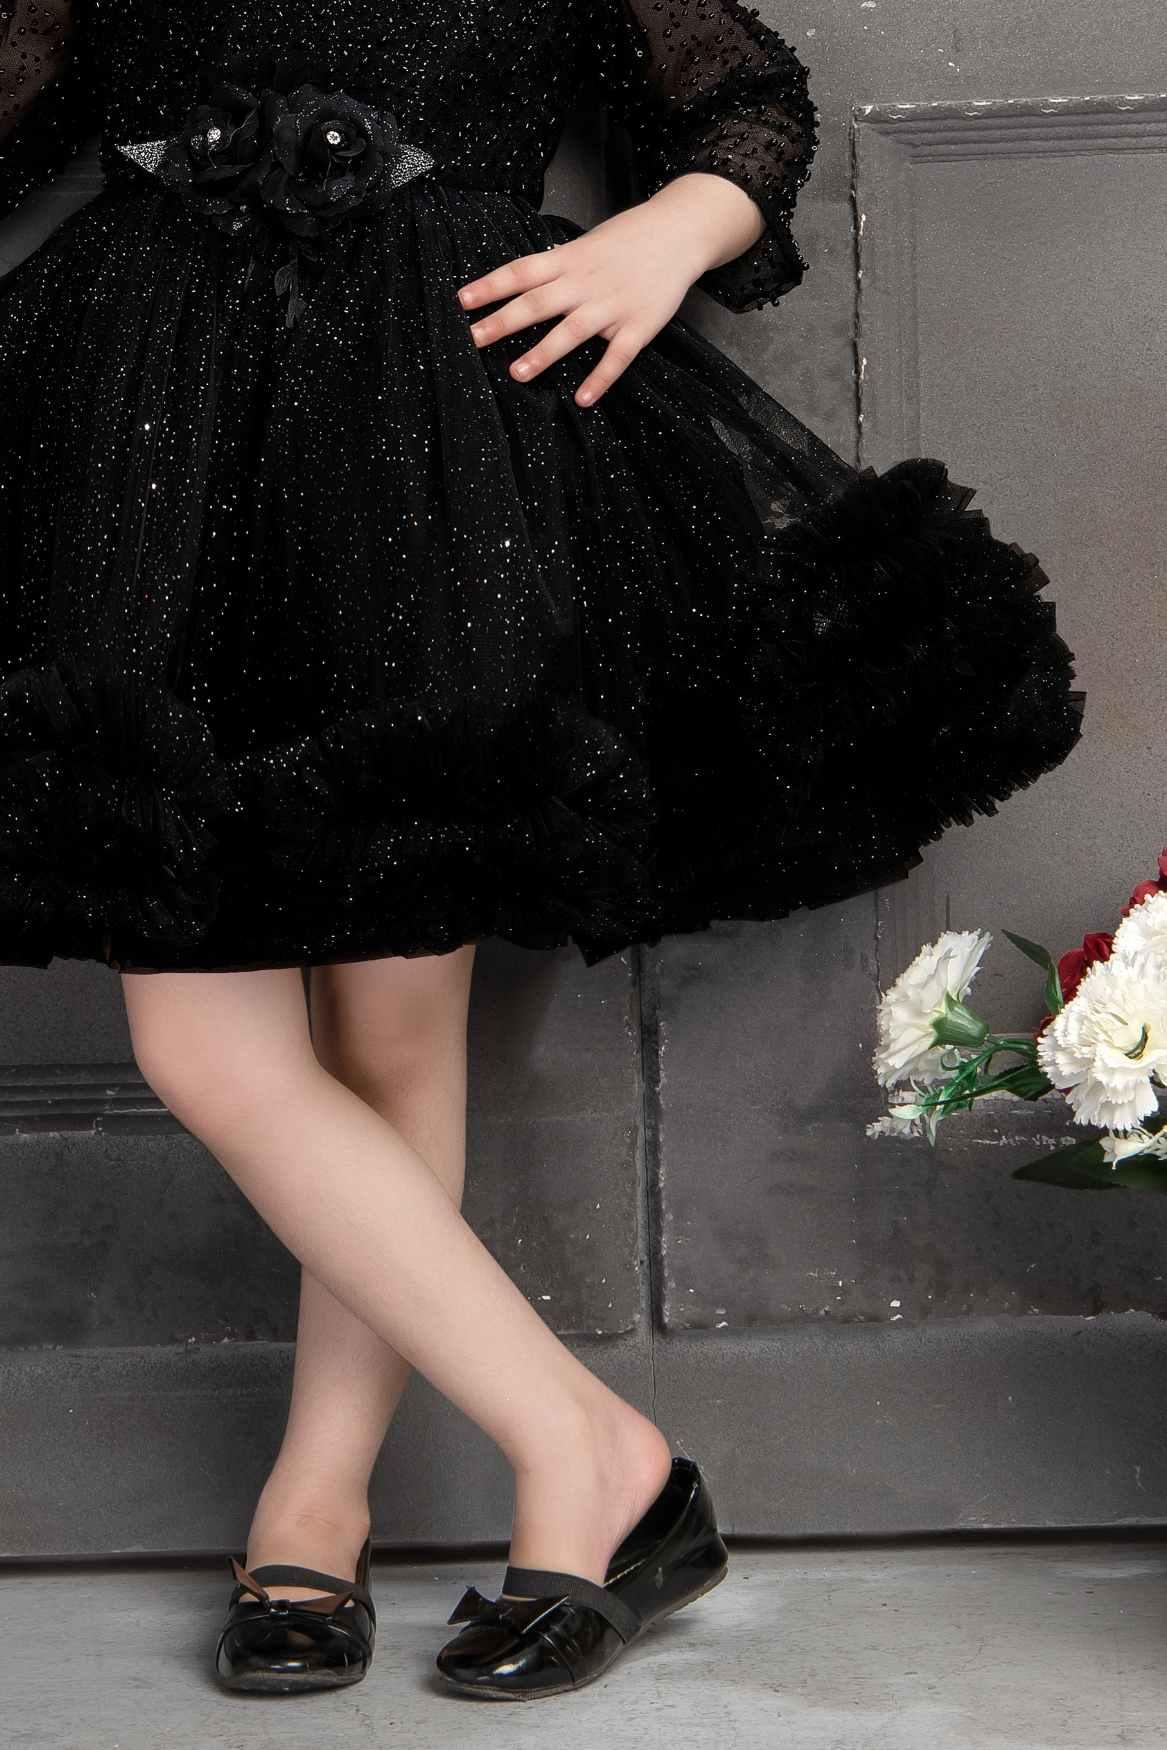 Sequin Black Net Ruffled Partywear Frock With Floral Embellishment For Girls - Lagorii Kids